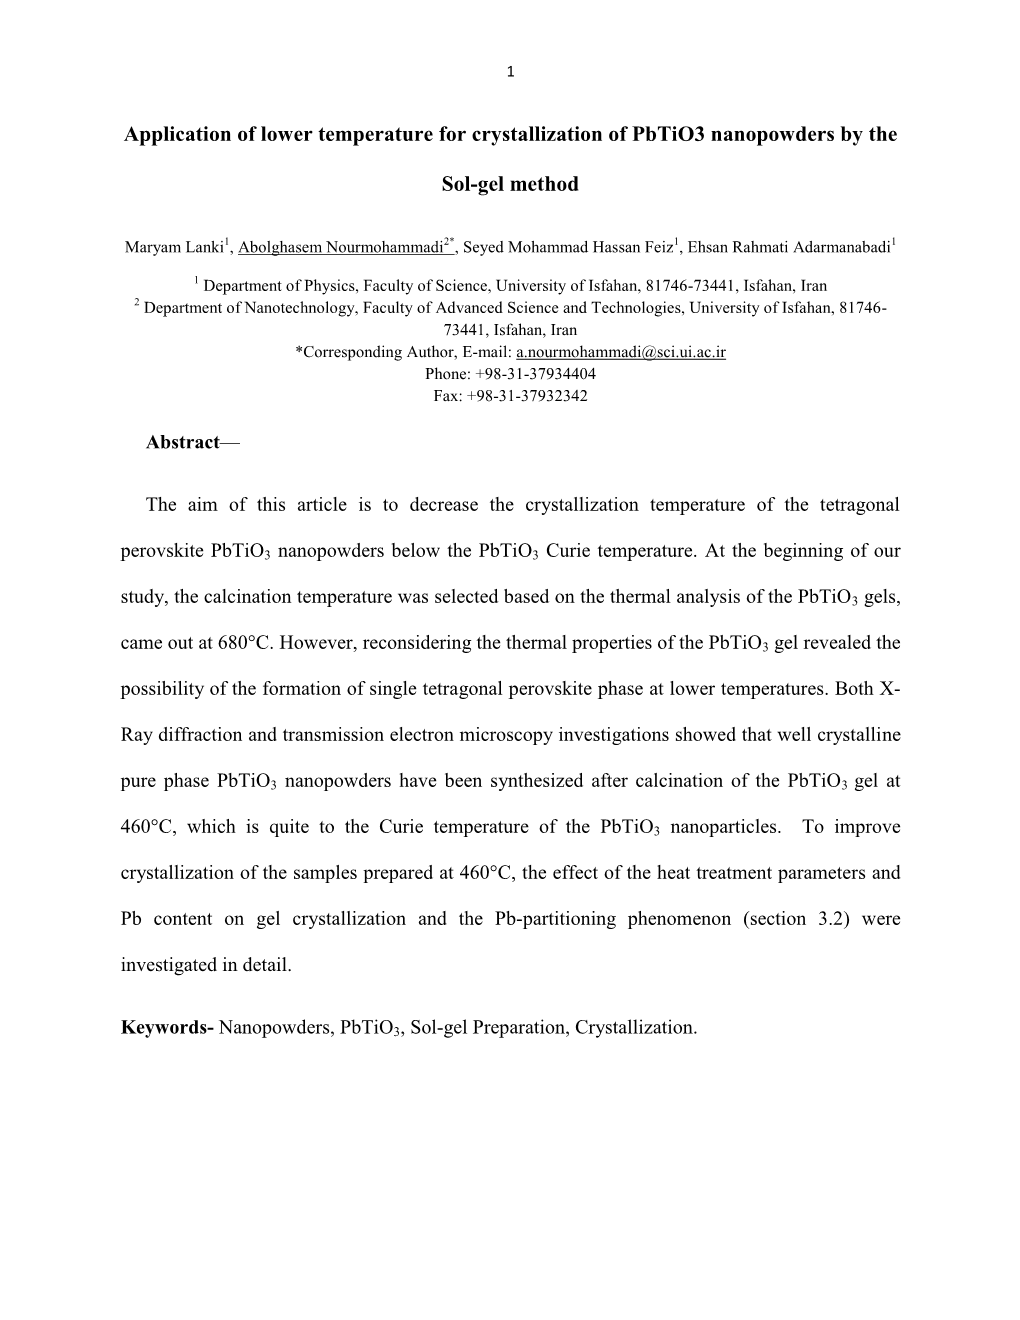 Application of Lower Temperature for Crystallization of Pbtio3 Nanopowders by the Sol-Gel Method